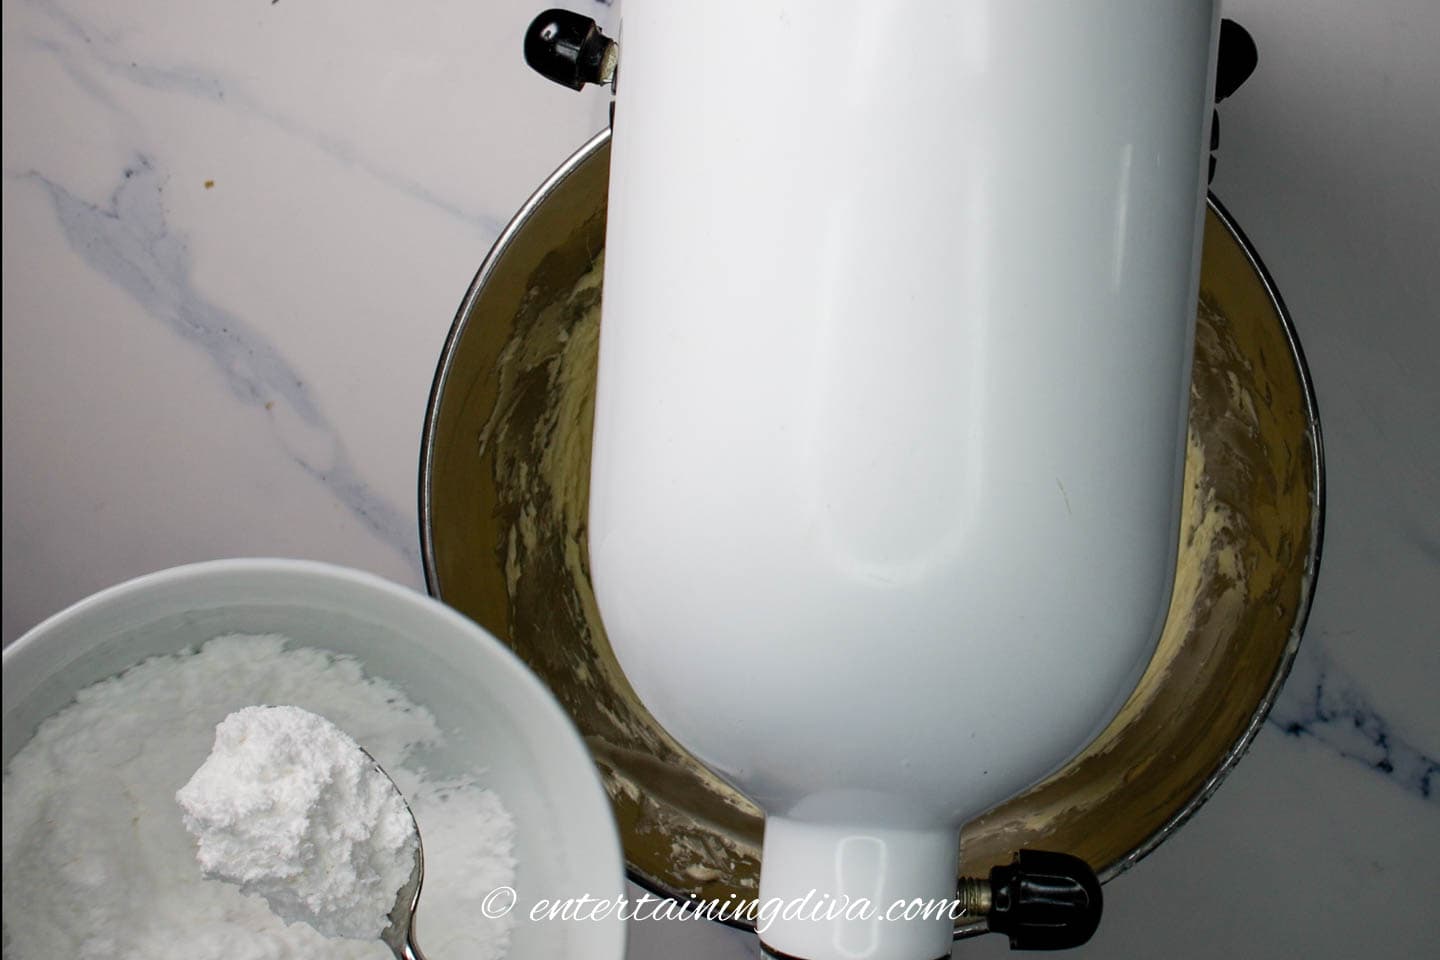 Adding icing sugar to the mixer with a spoon